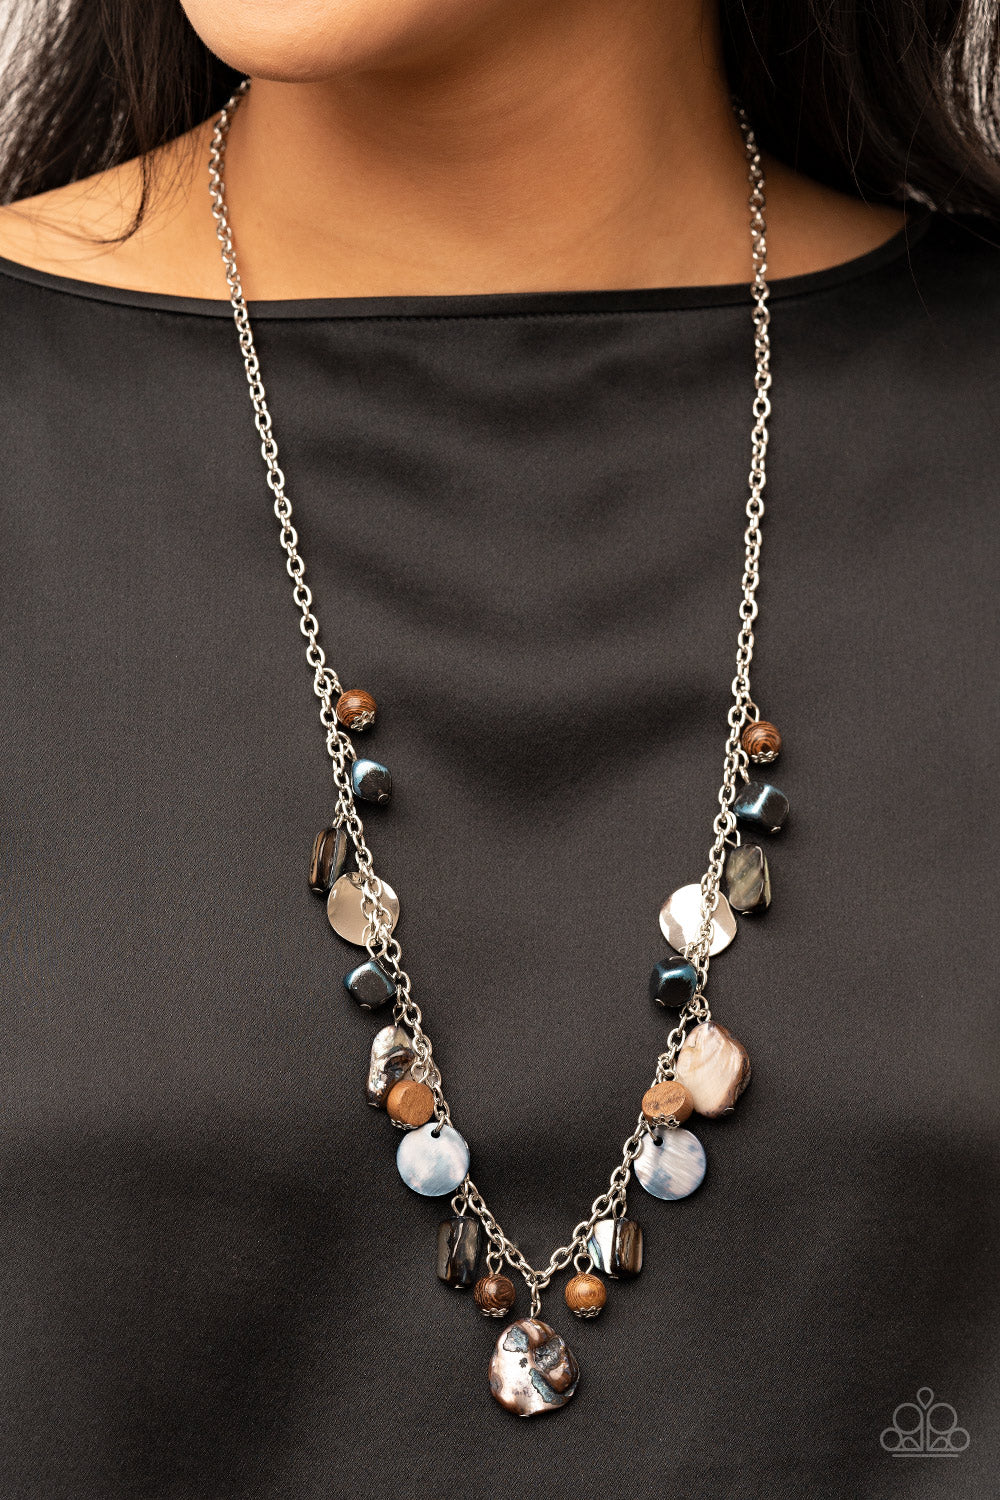 Caribbean Charisma - Blue and Silver Necklace- Paparazzi Accessories